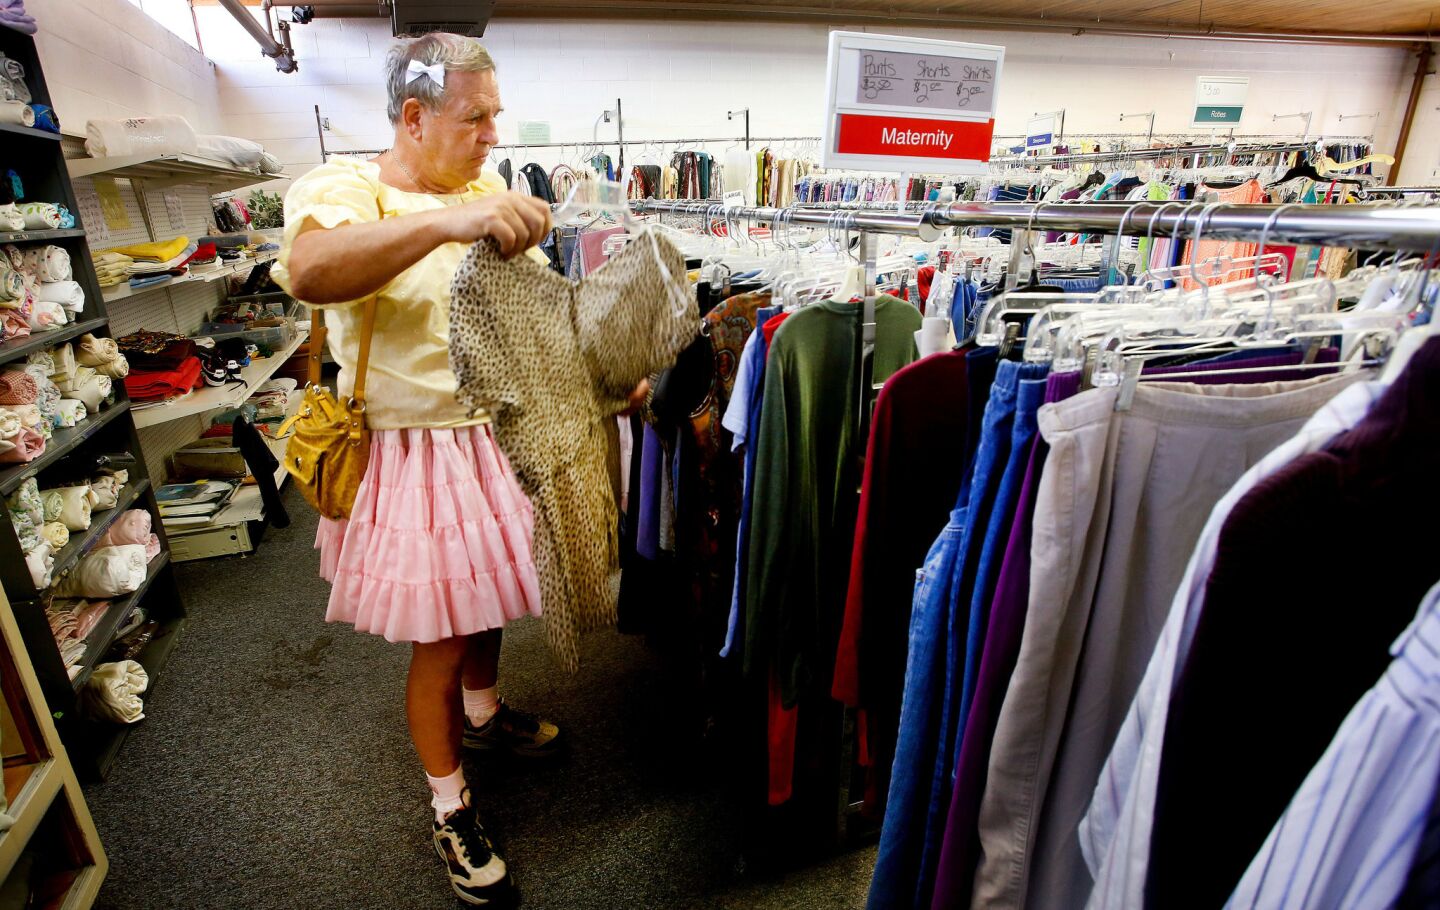 Goodwin shops for an outfit at secondhand store in Casper. He began secretly dressing in girls clothes in his youth as "an escape from a hostile environment."